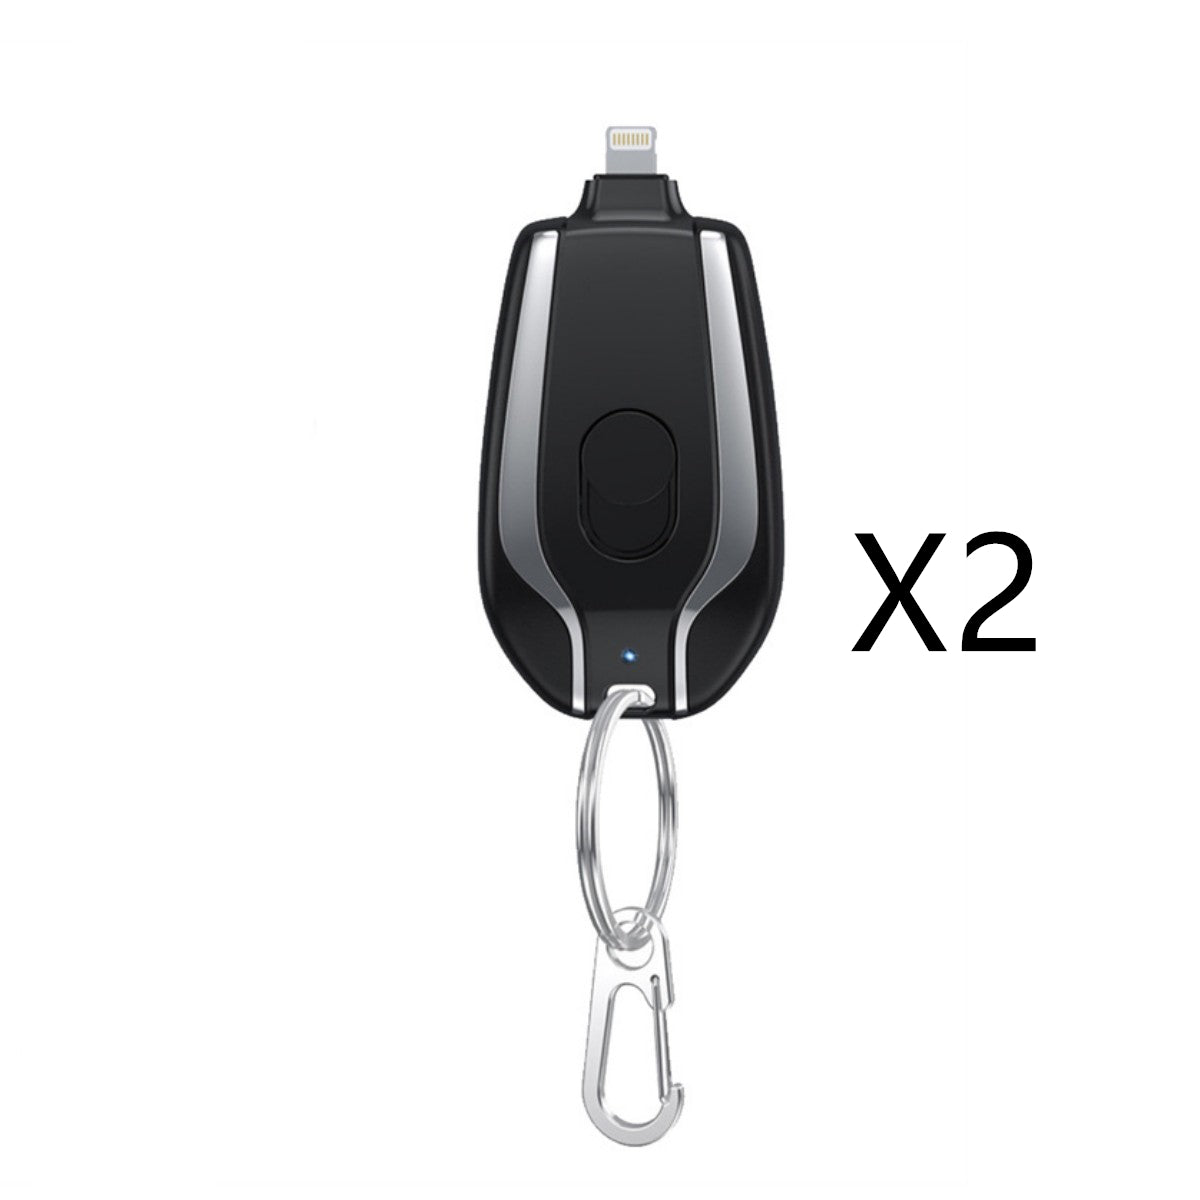 ﻿1500mAh Mini Power Emergency Pod Keychain Charger With Type-C